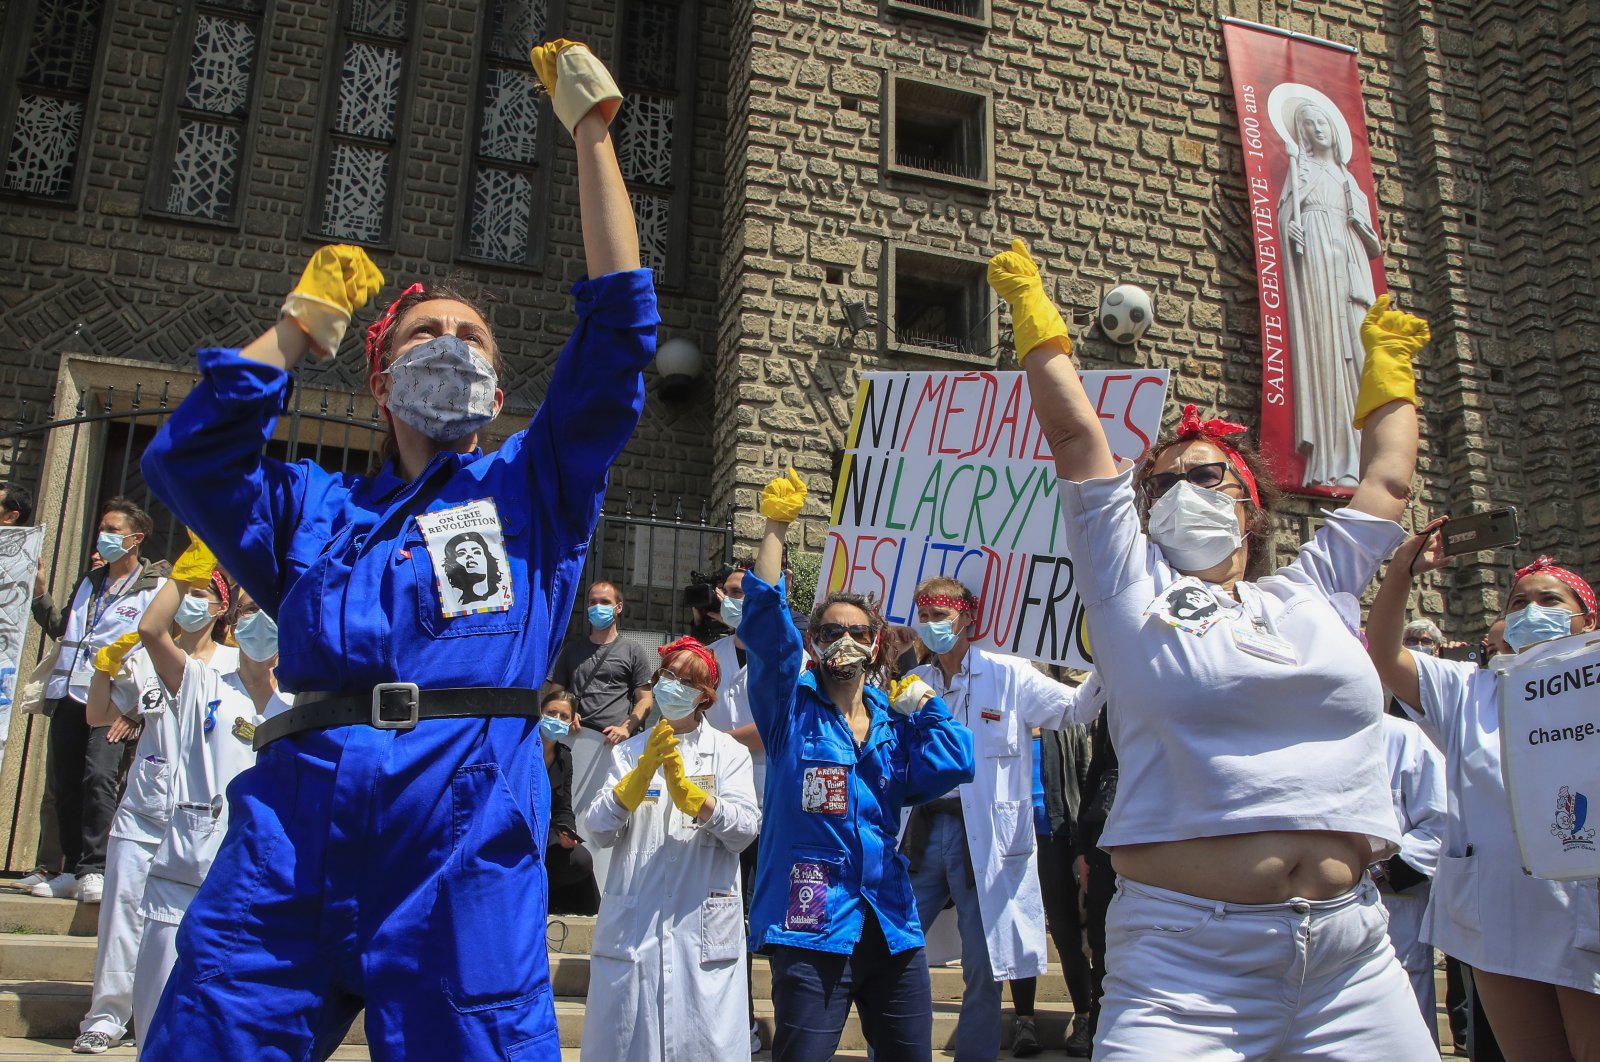 Medical personnel from the Robert Debre hospital, wearing masks to help curb the spread of the coronavirus, stage a protest in Paris, France, June 11, 2020. (AP Photo)